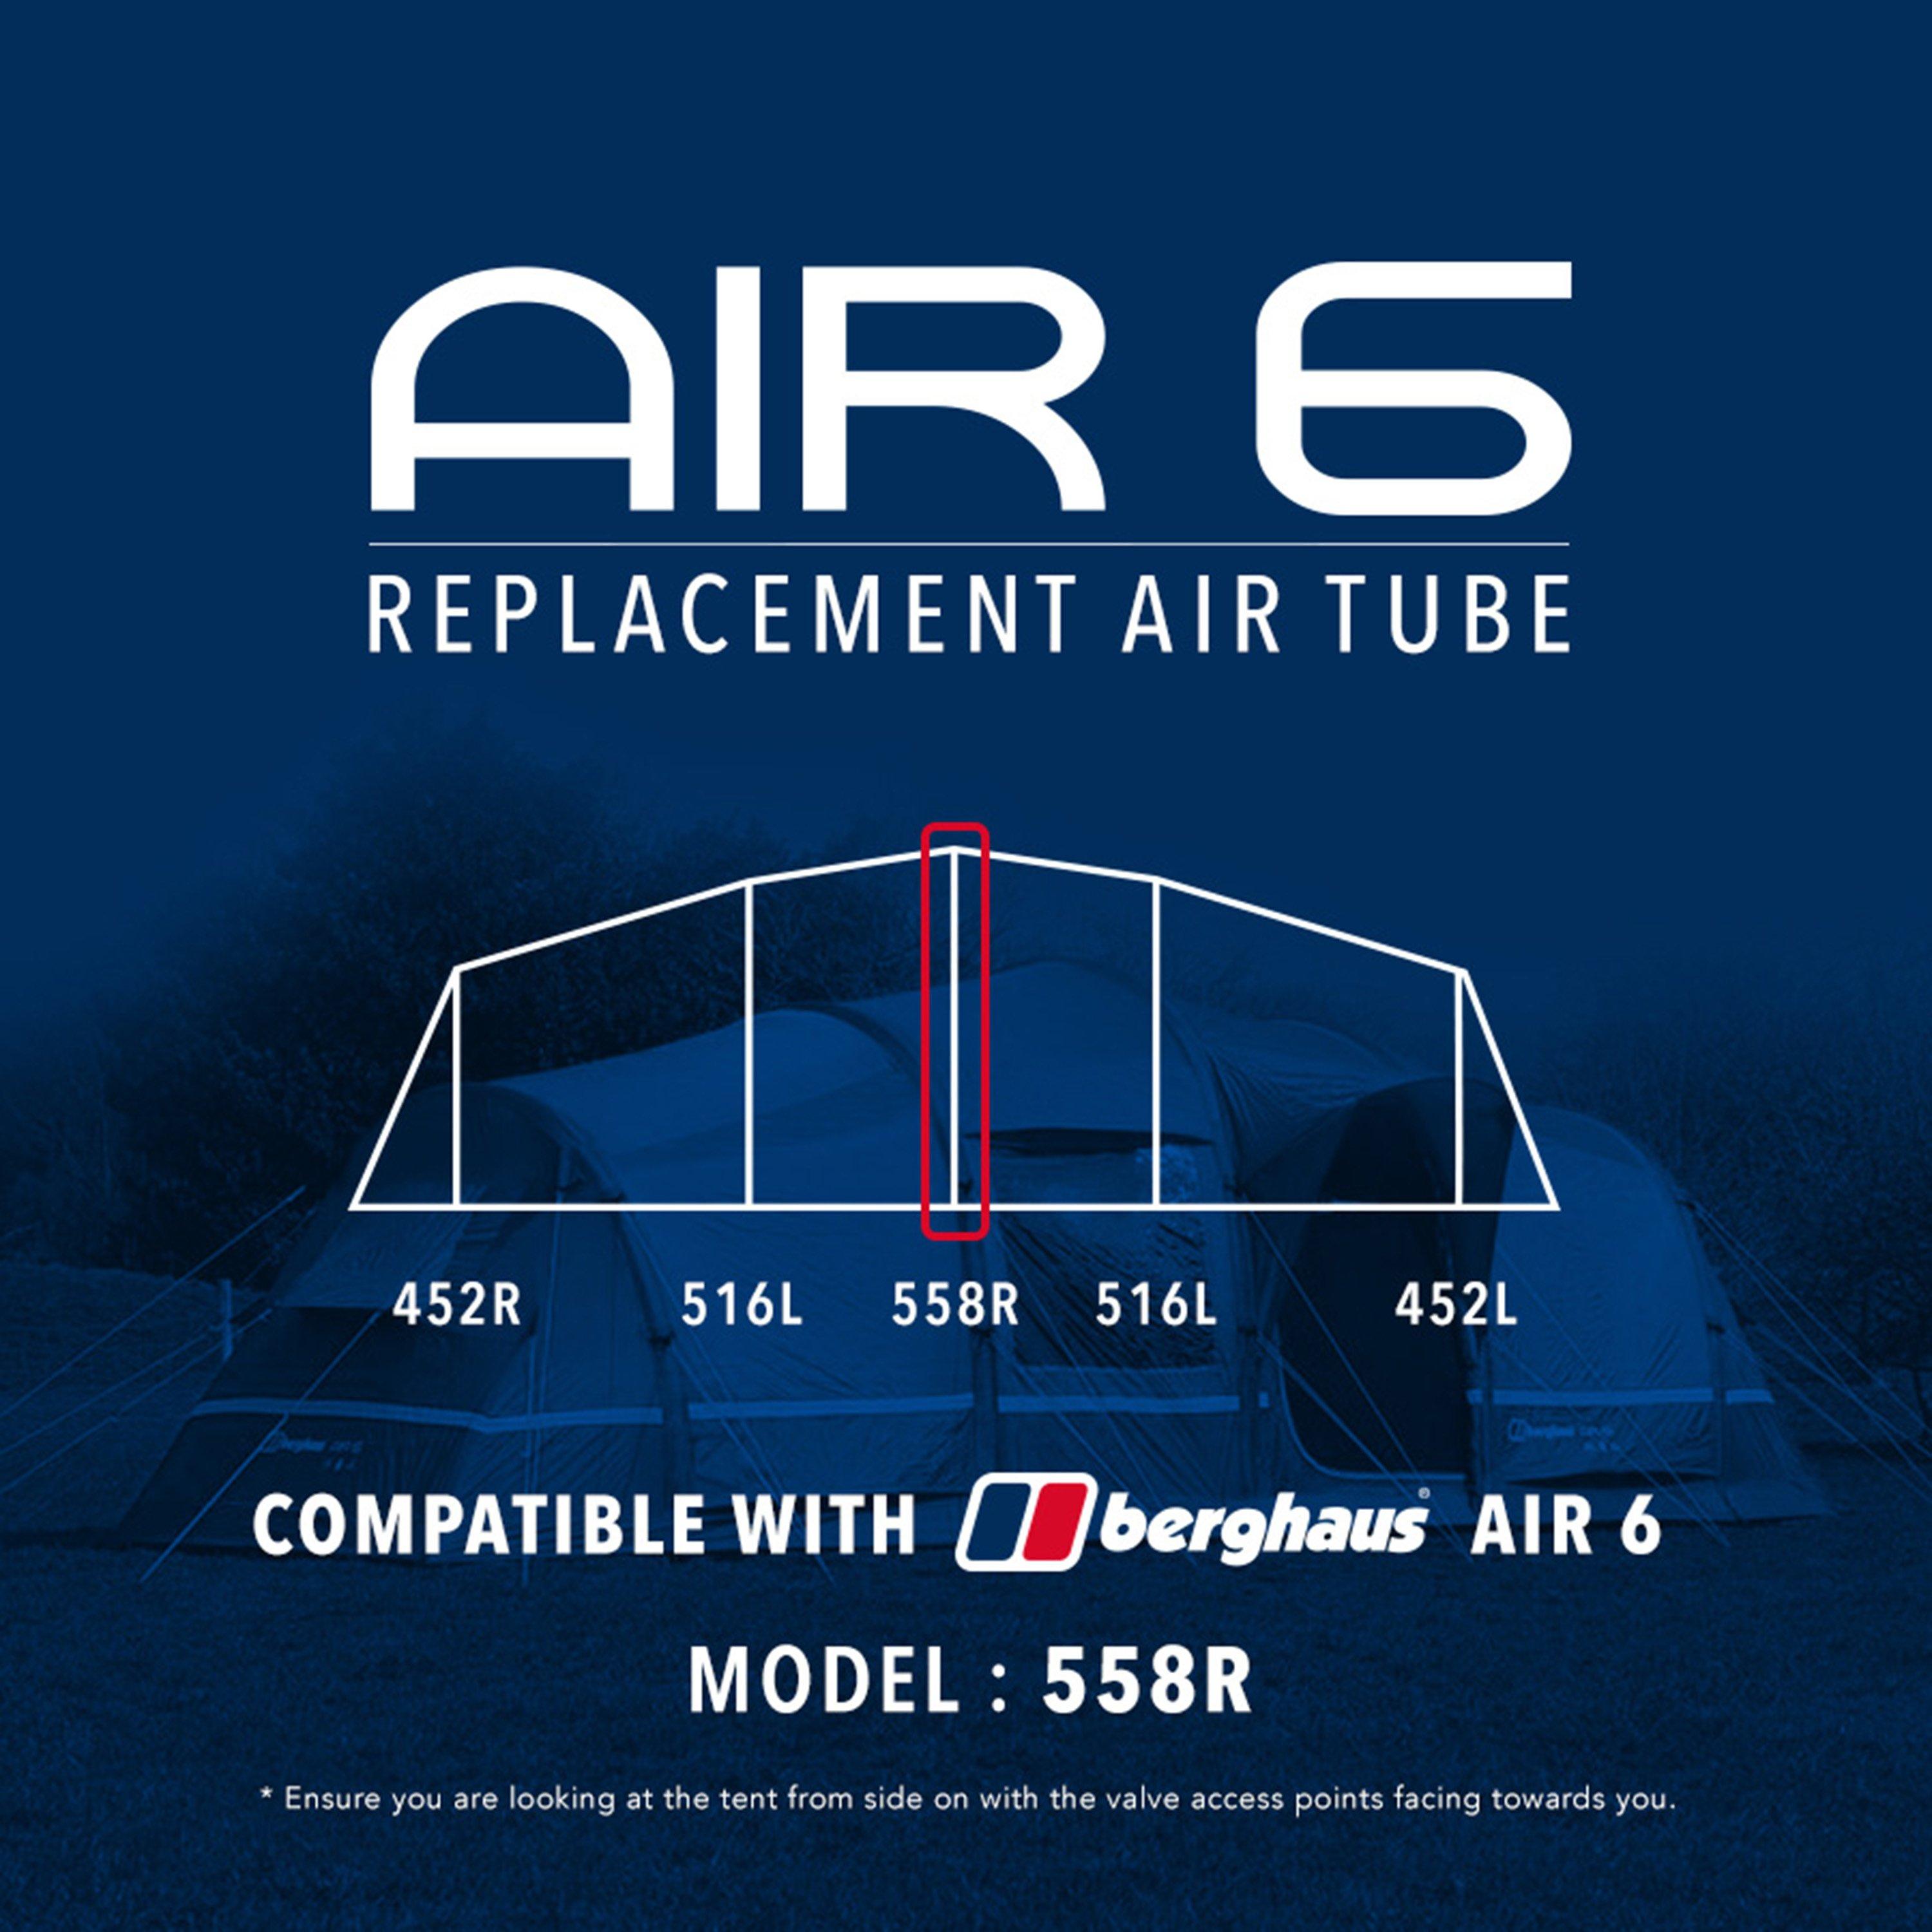  Eurohike Air 6 Replacement Air Tube (Middle - 558R), Blue